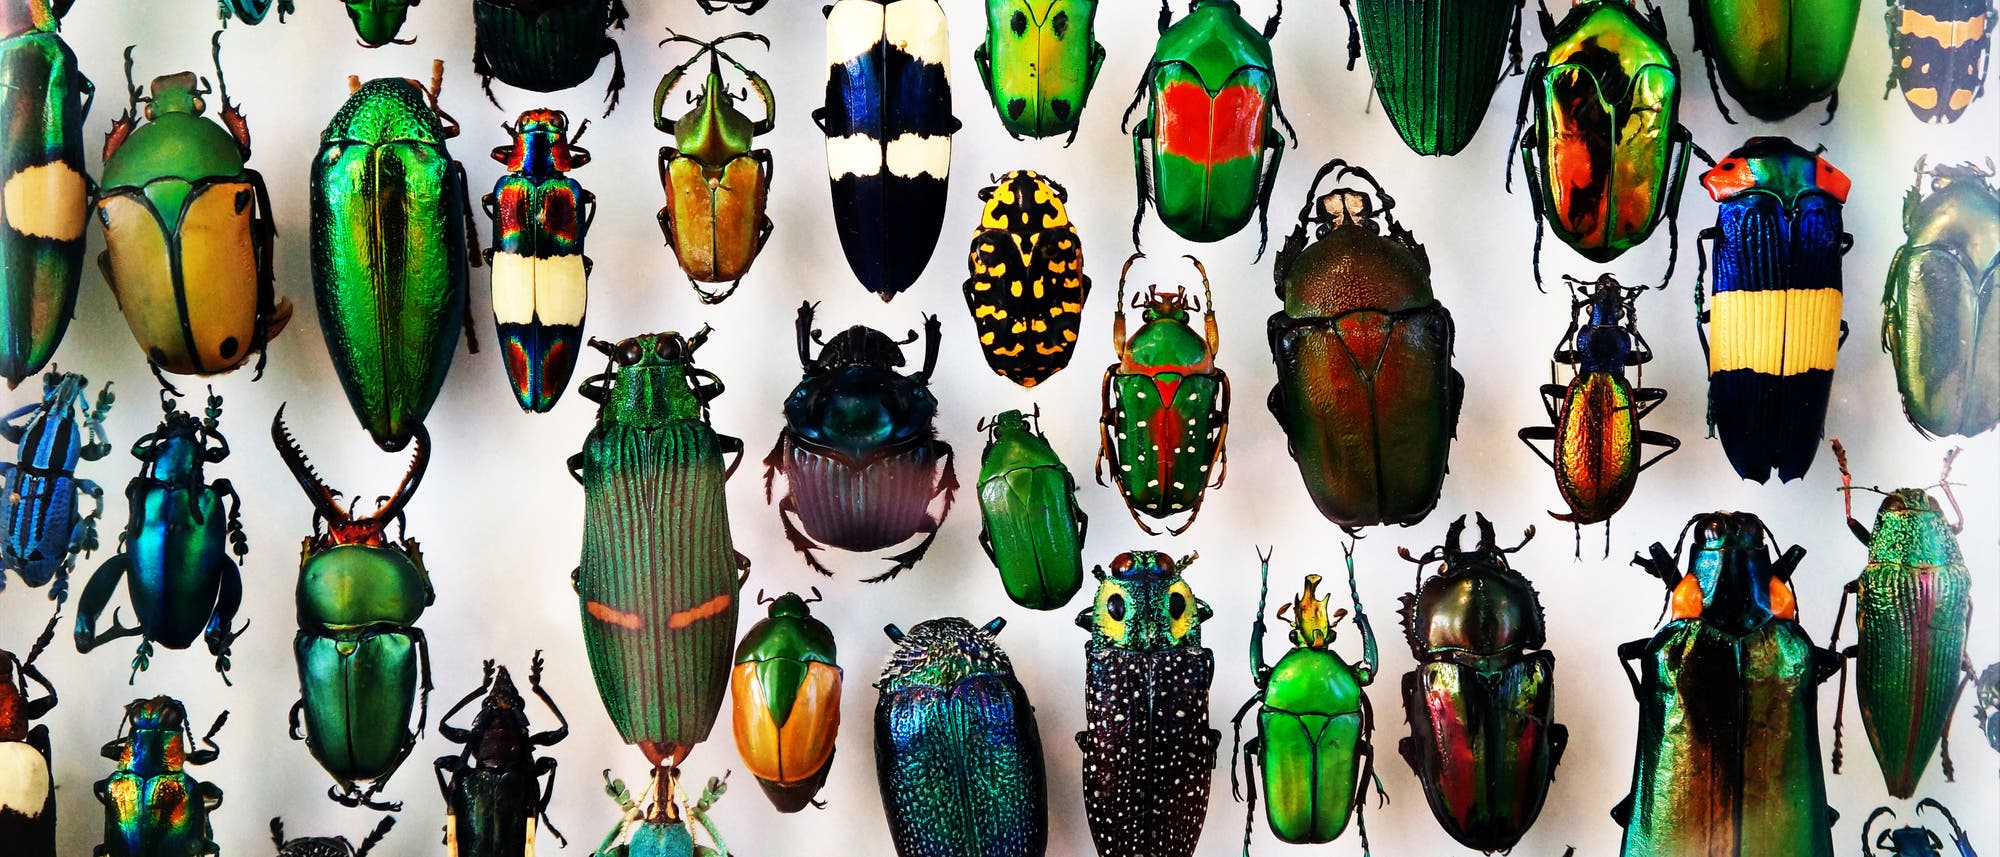 Eine Sammlung bunter tropischer Käfer. "The Creator would appear as endowed with a passion for stars, on the one hand, and for beetles on the other." - J.B.S. Haldane